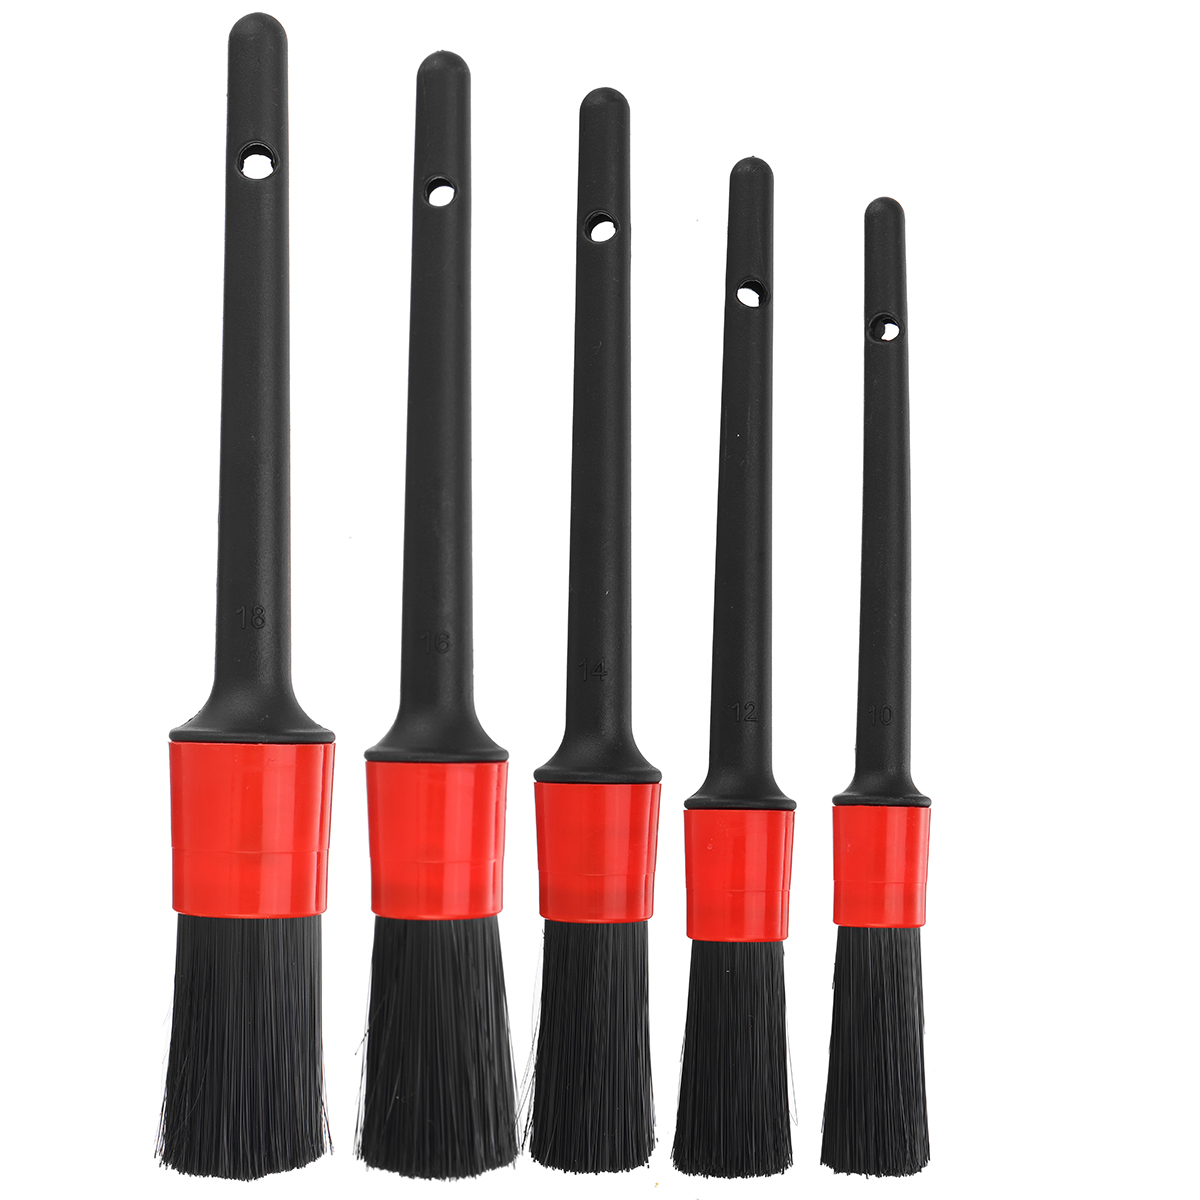 30PCS Cleaning Detailing Brush Set Dirt Dust Clean Brush Exterior Leather Air Vents Care Clean Tools for Car Motorcycle Air Vents